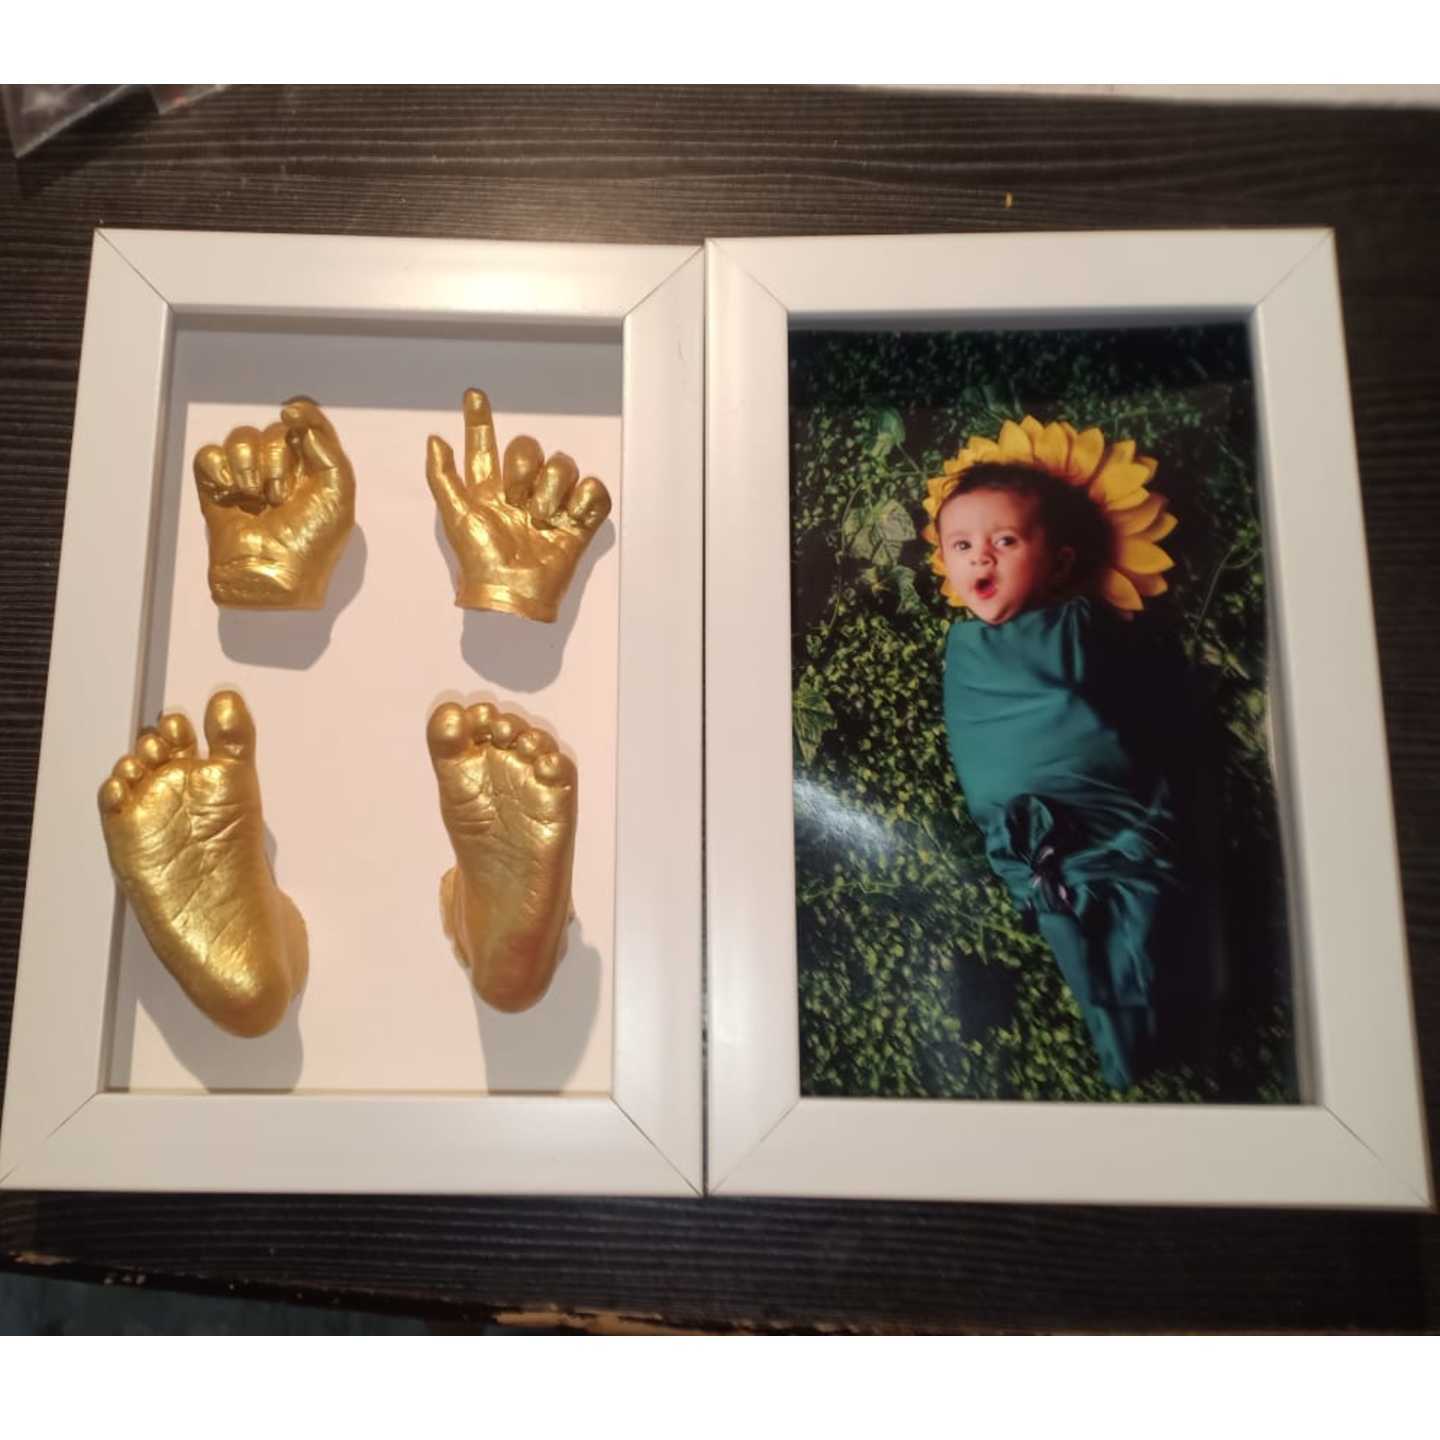 DIY Baby Hand Casting Kit with Frame ( 4 castings)